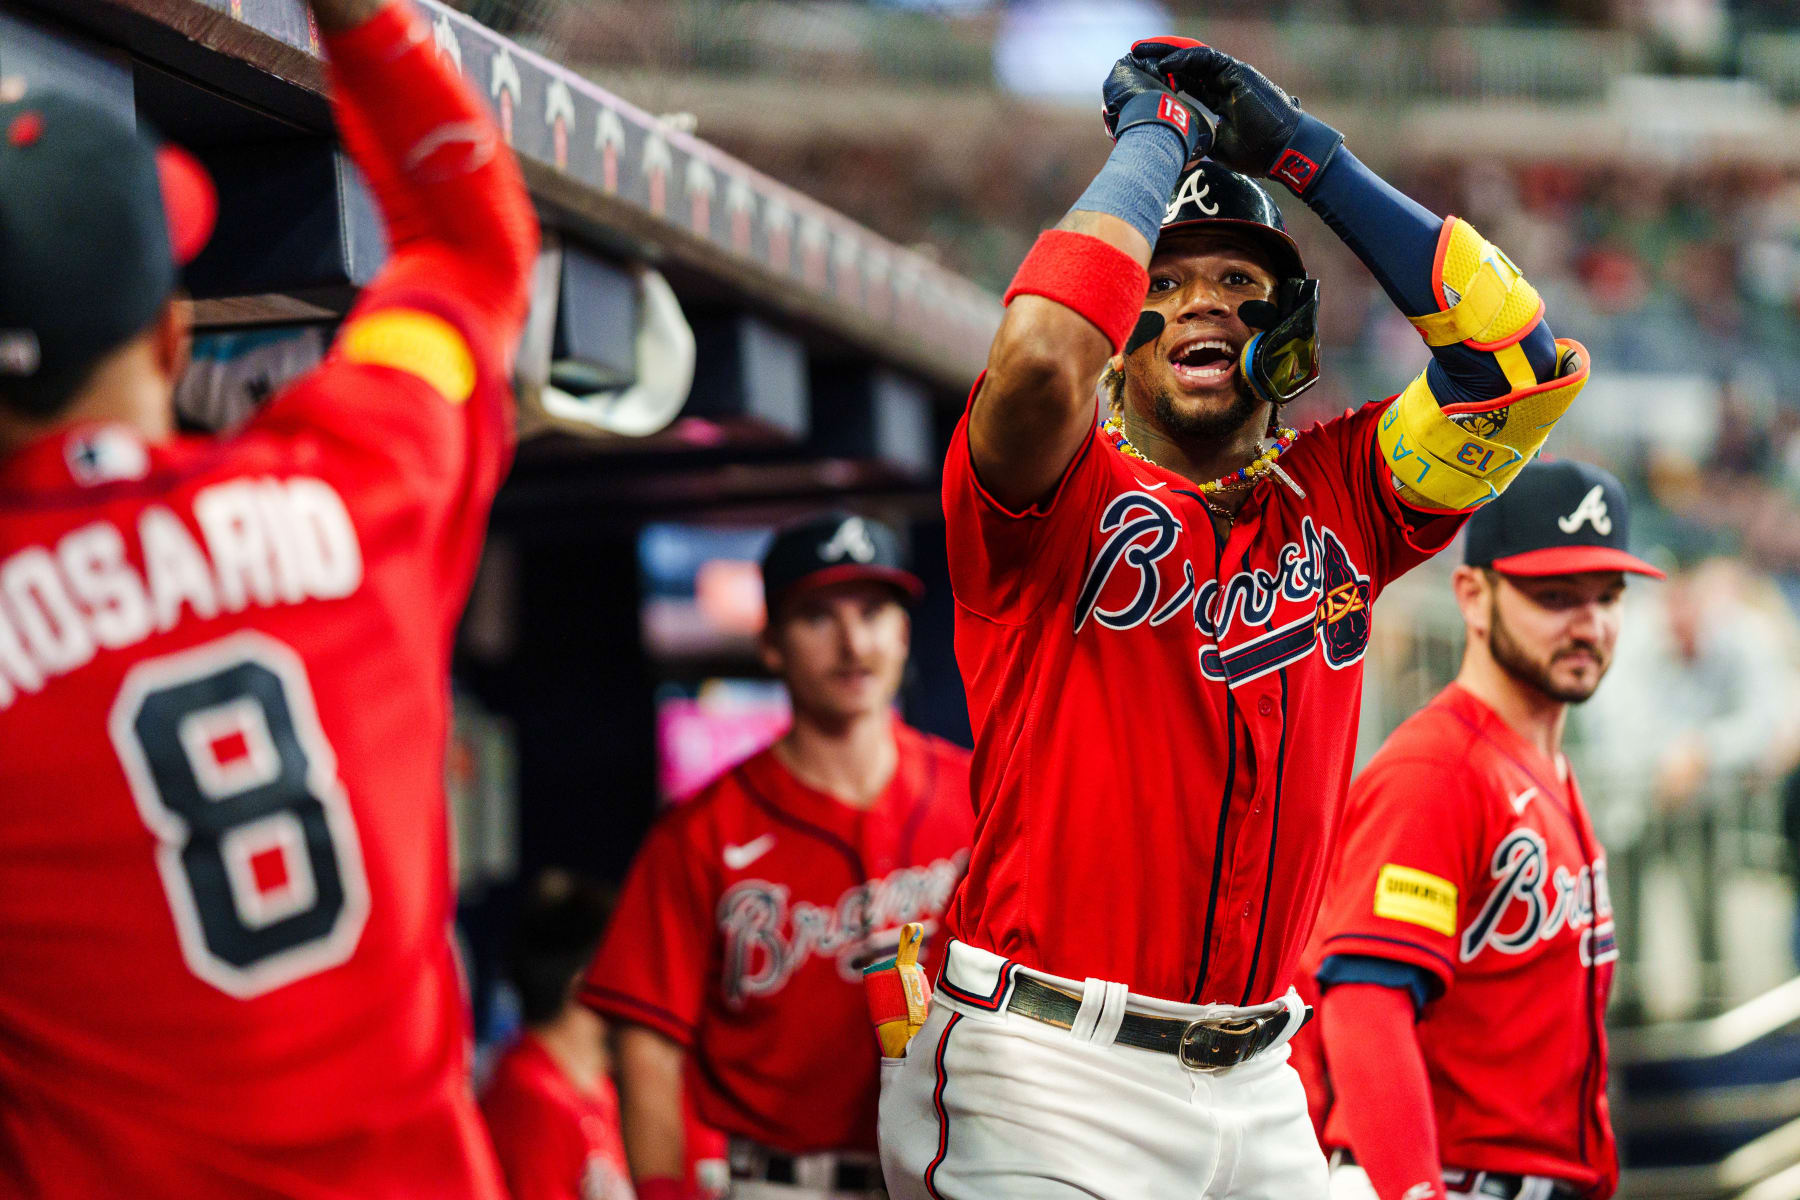 Braves star Ronald Acuña Jr. gets chance to really shine in playoffs